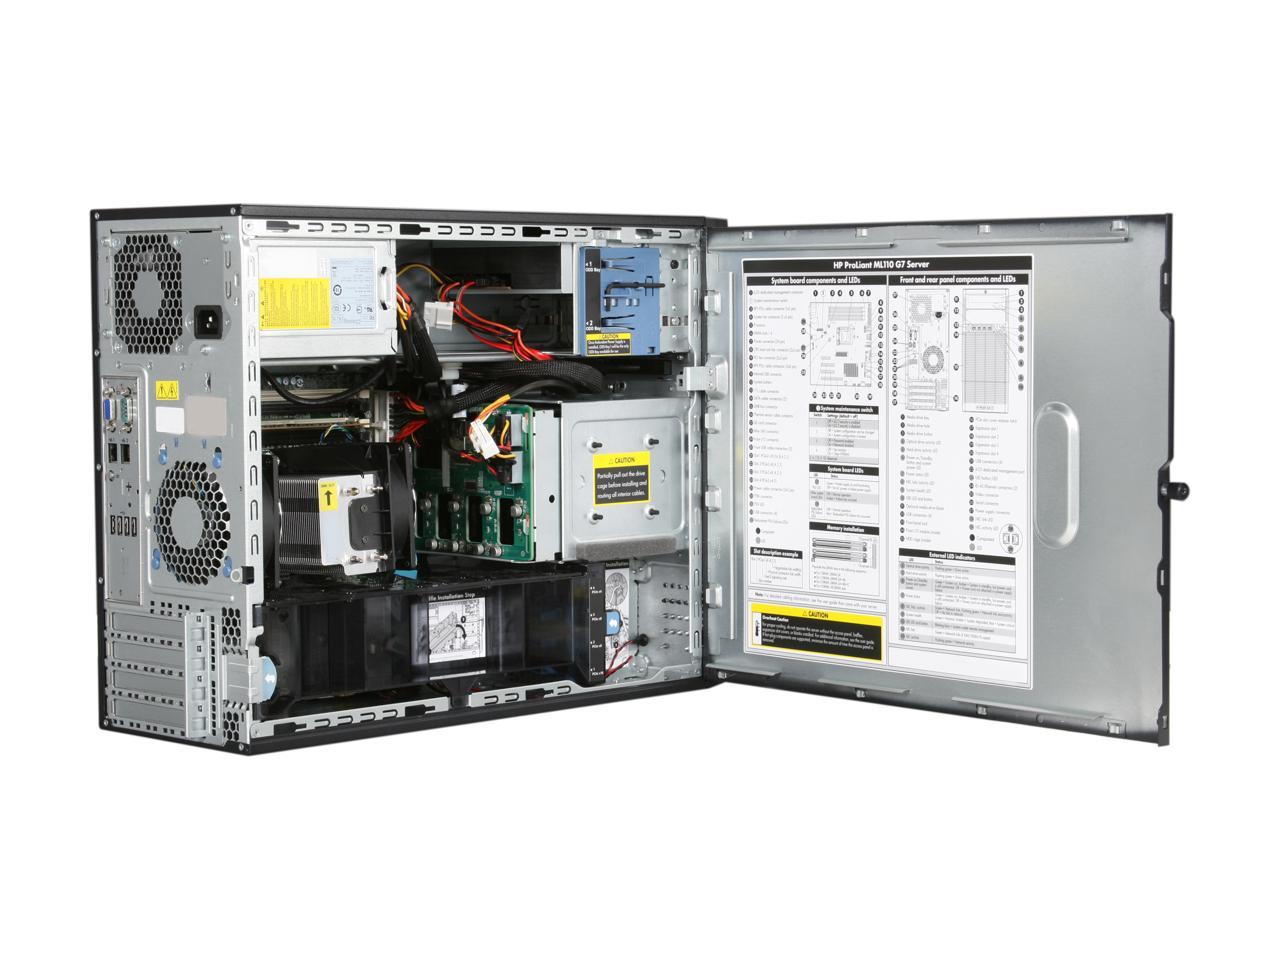 HP ProLiant ML110 G7 Tower Server System Intel Xeon E3-1220 3.1GHz 4C/4T  2GB (1 x 2GB) No HDD. Requires HP Hard Drives 639259-005